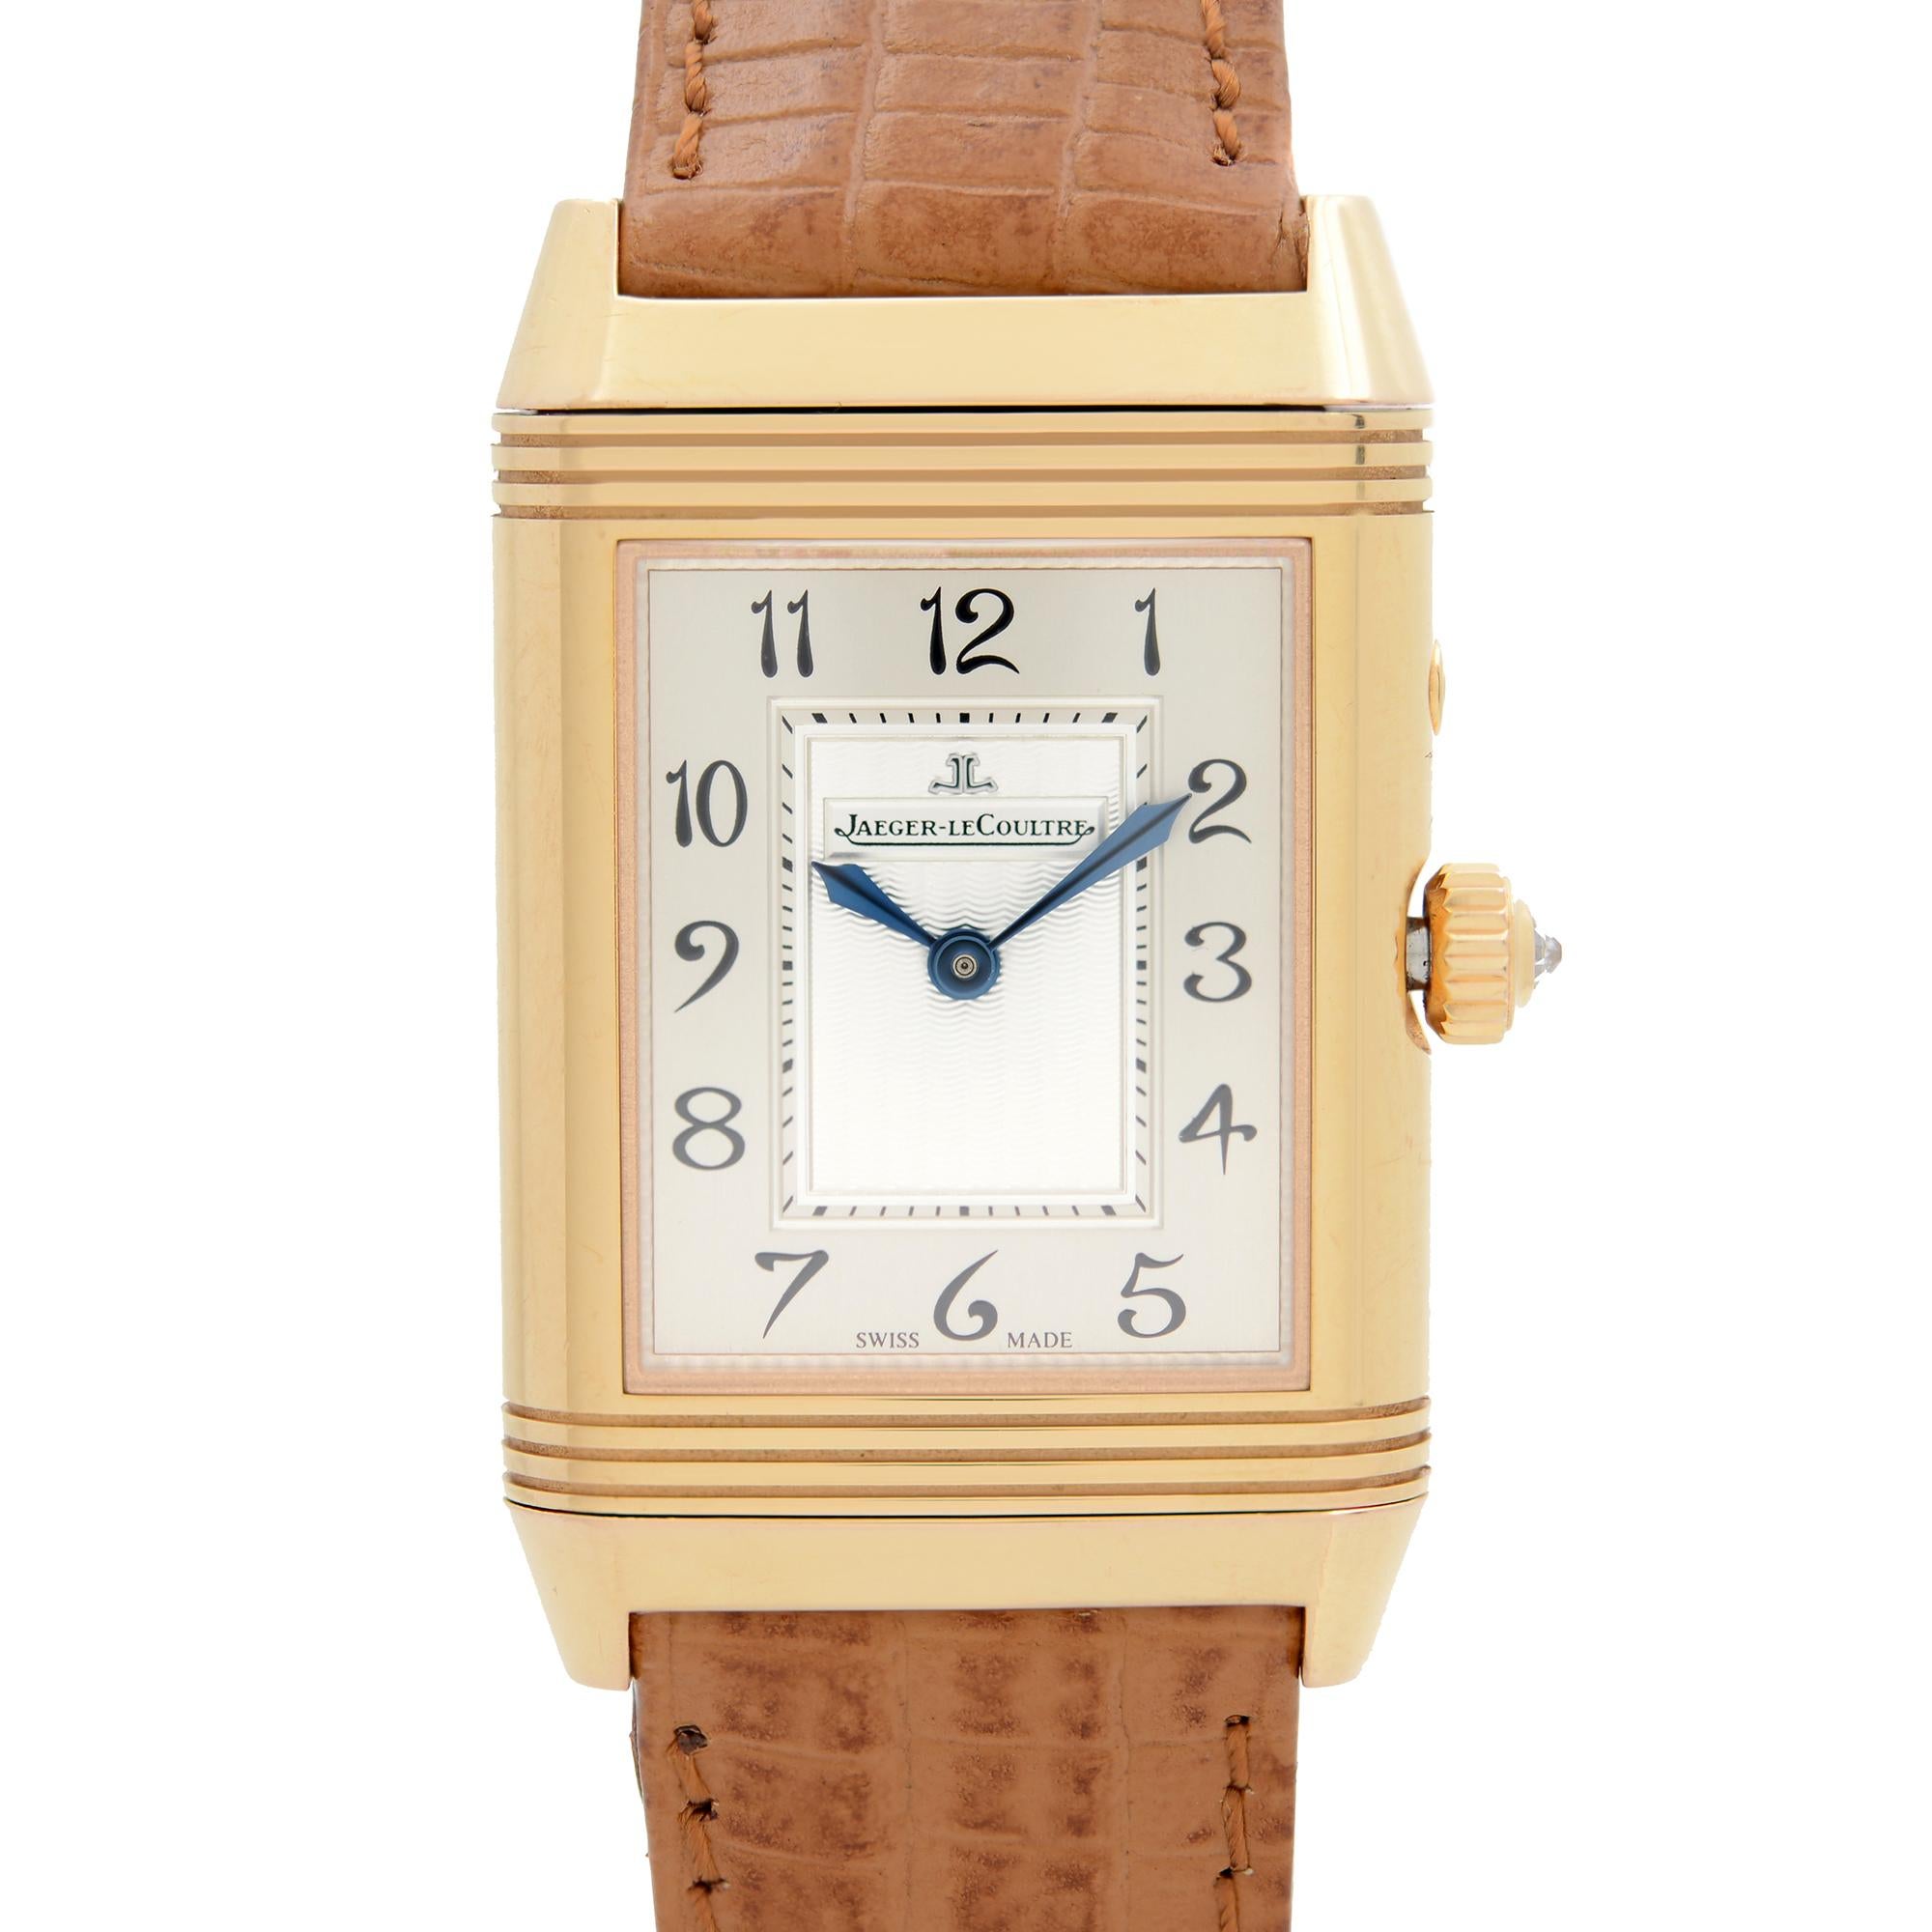 Pre Owned Jaeger LeCoultre Reverso Duetto Duo Classique Rose Gold Diamond Watch 269.2.54. After-market leather band and aftermarket Buckle. This Timepiece Features: 18kt Rose Gold Rotating Case (Silver Dial & Black Dial), Brown Leather Strap, Silver